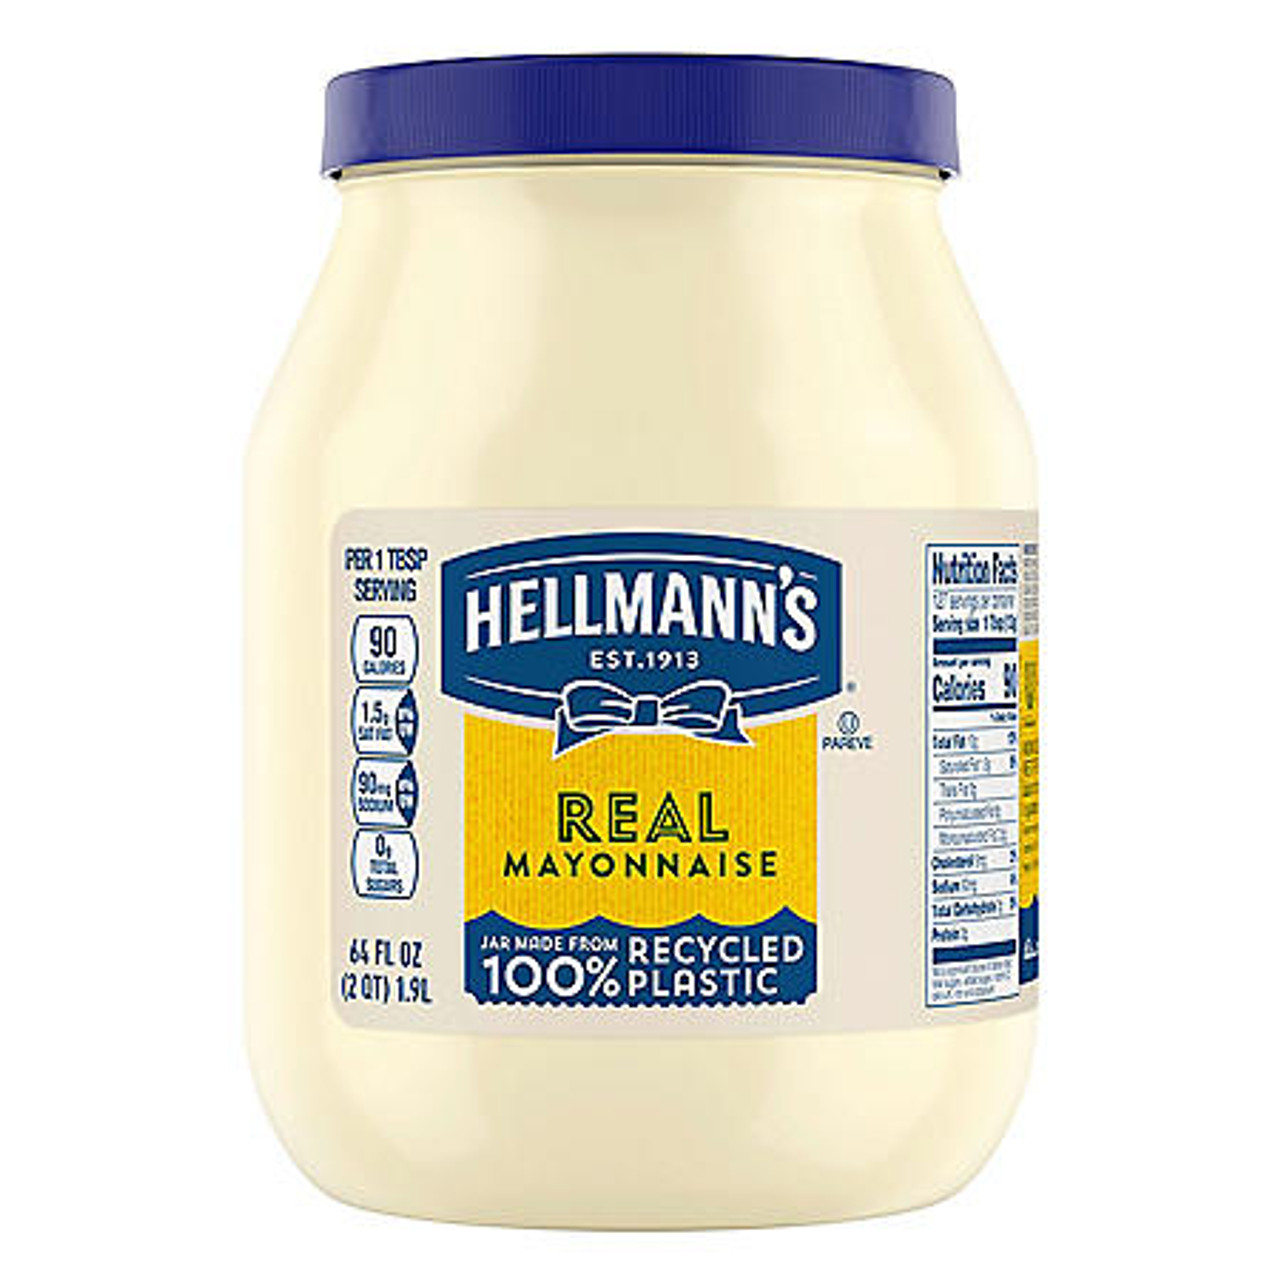 Hellmann's Real Mayonnaise (64 oz.) - [From 44.00 - Choose pk Qty ] - *Ships from Miami